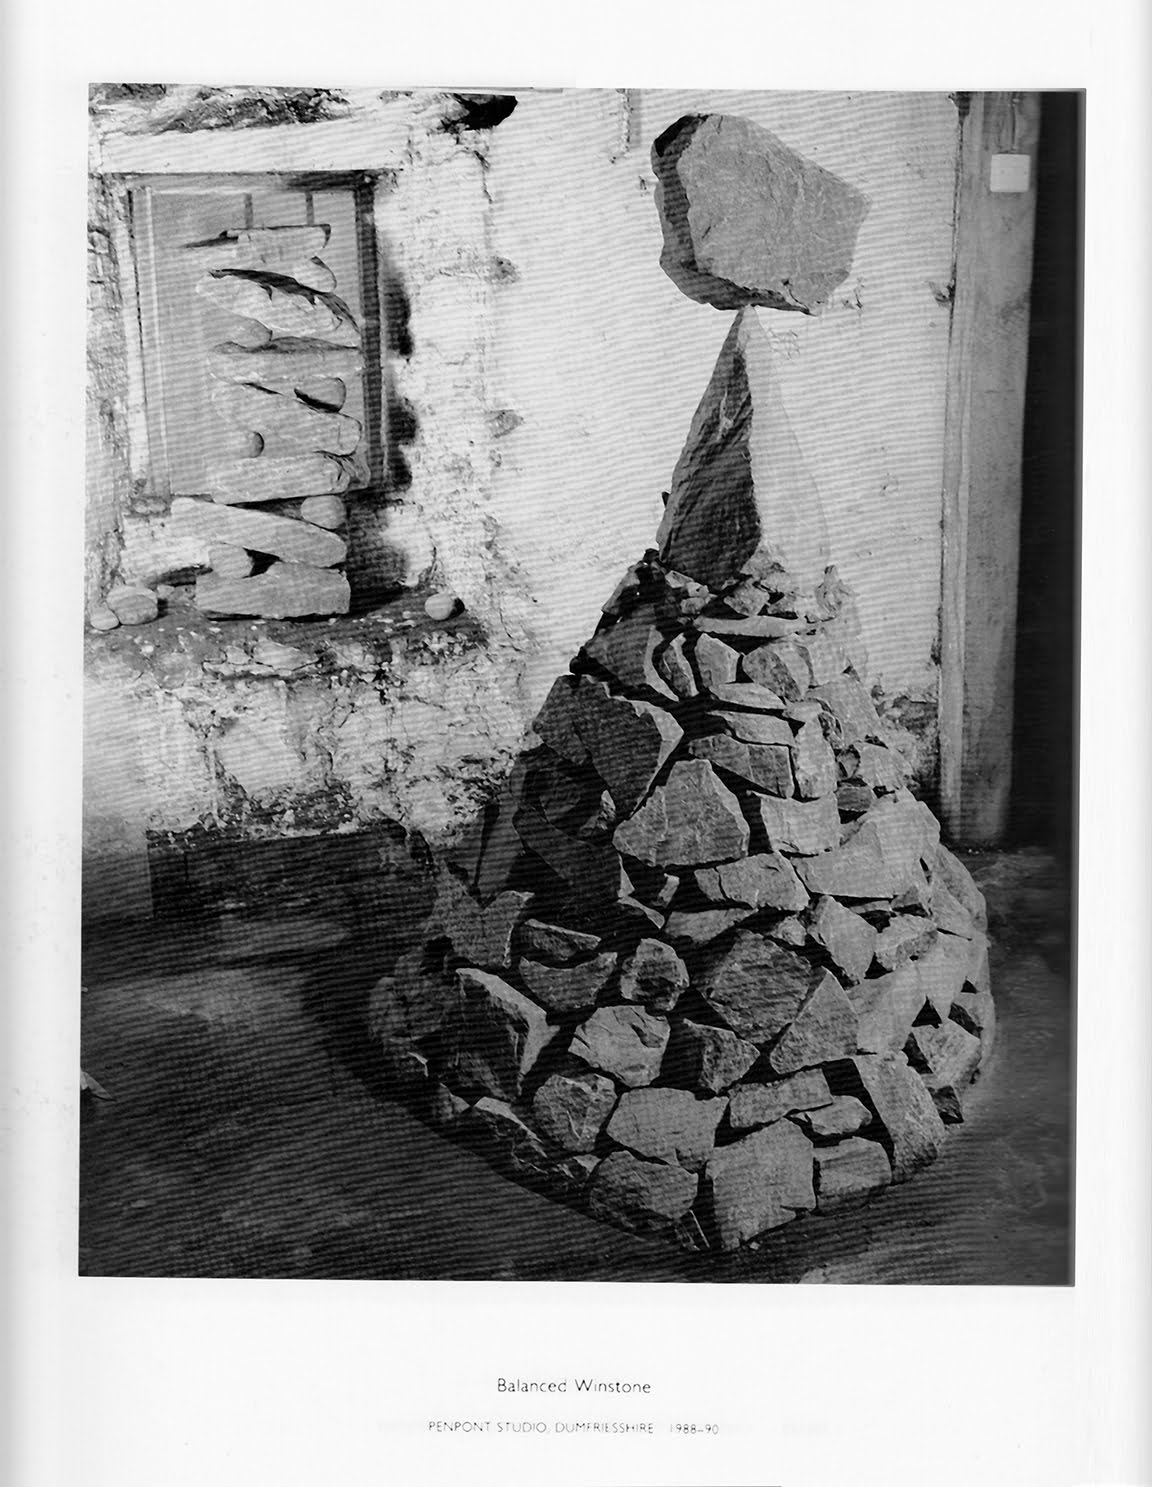 Balanced Winstone sculpture by Andy Goldsworthy.